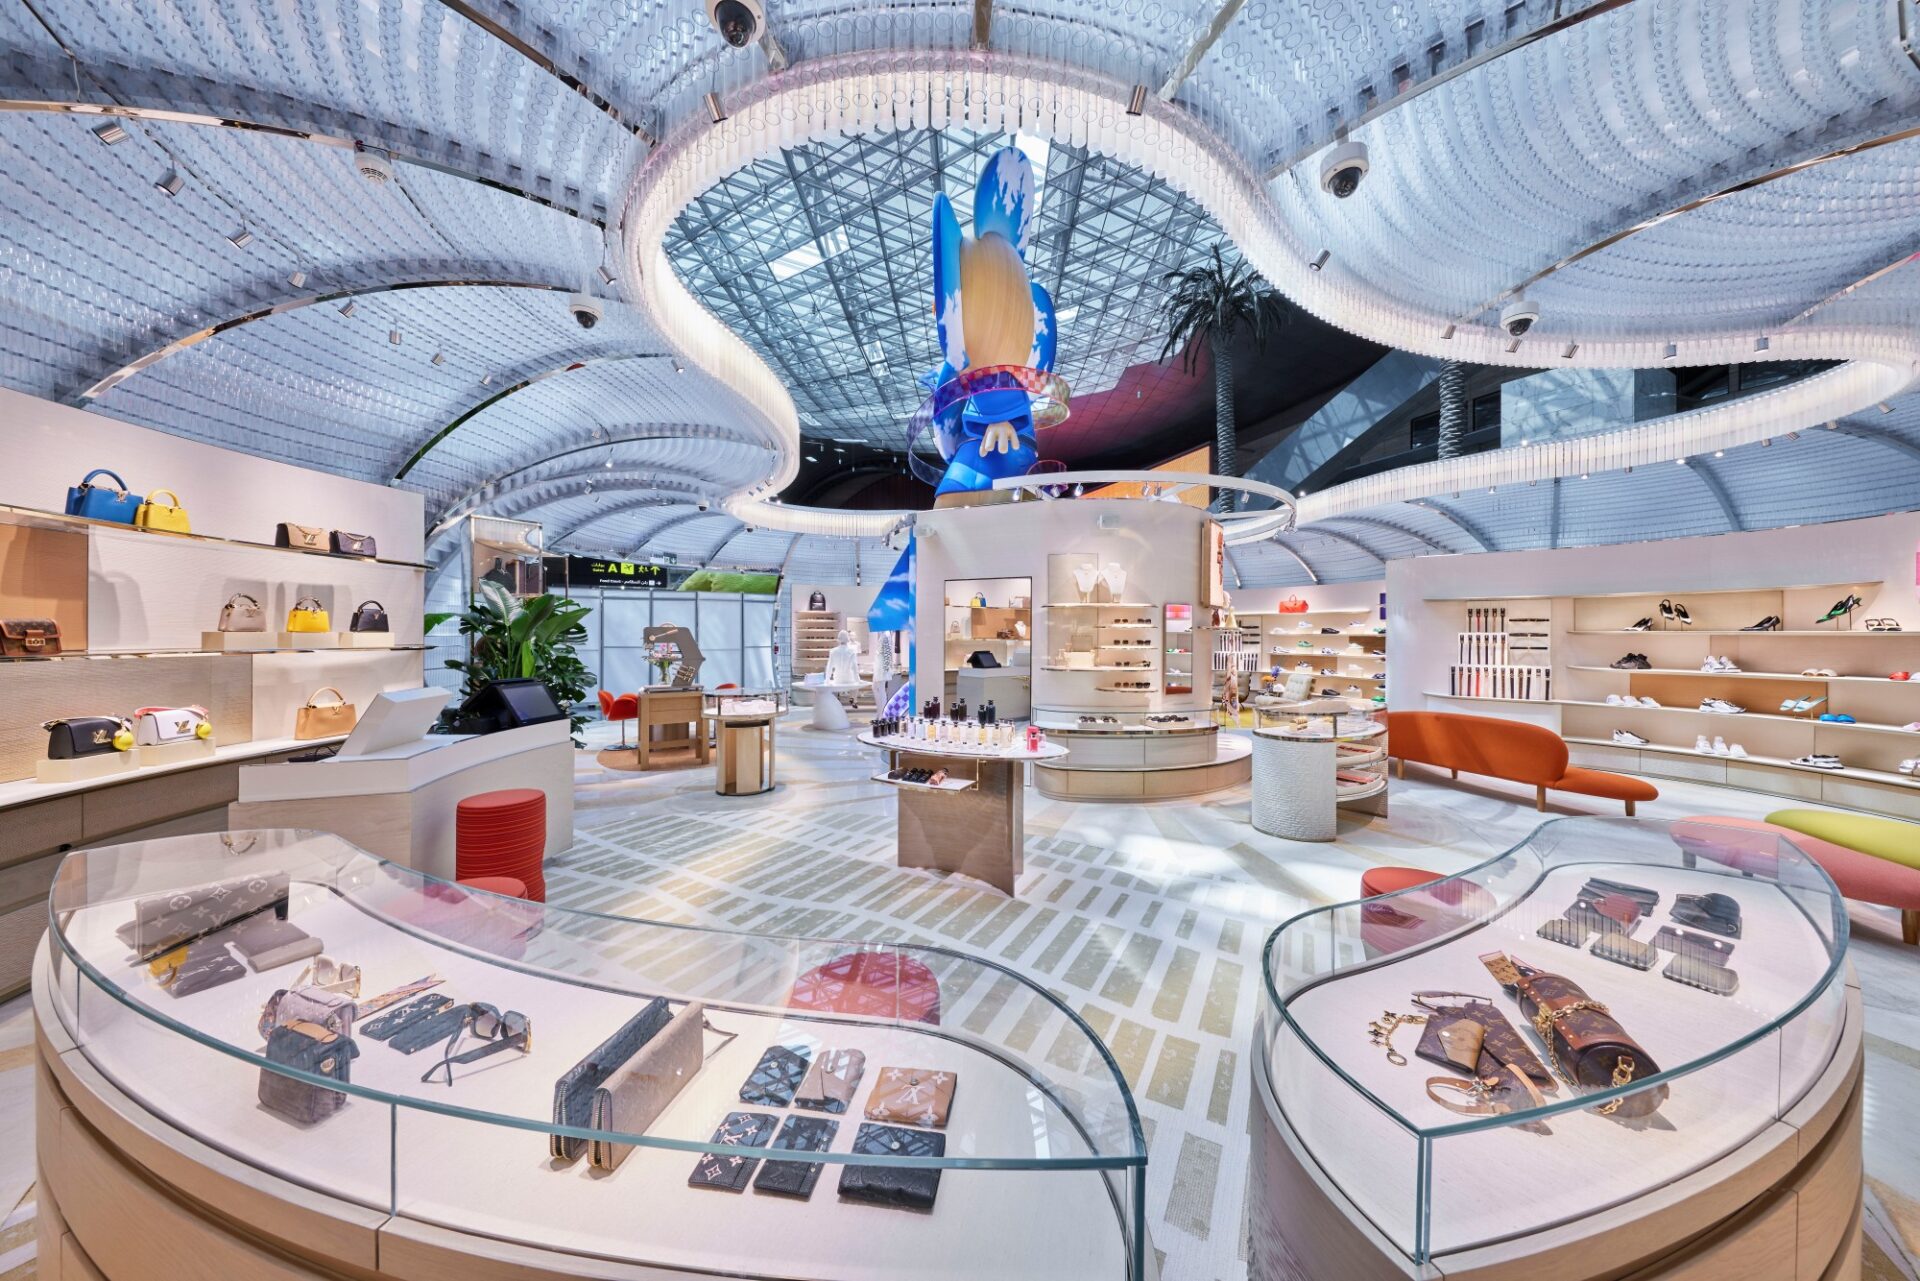 Louis Vuitton opens new store in Doha at Hamad International Airport # LouisVuitton #LouisVuittonDoha #Doha #HamadInternationalAirport…